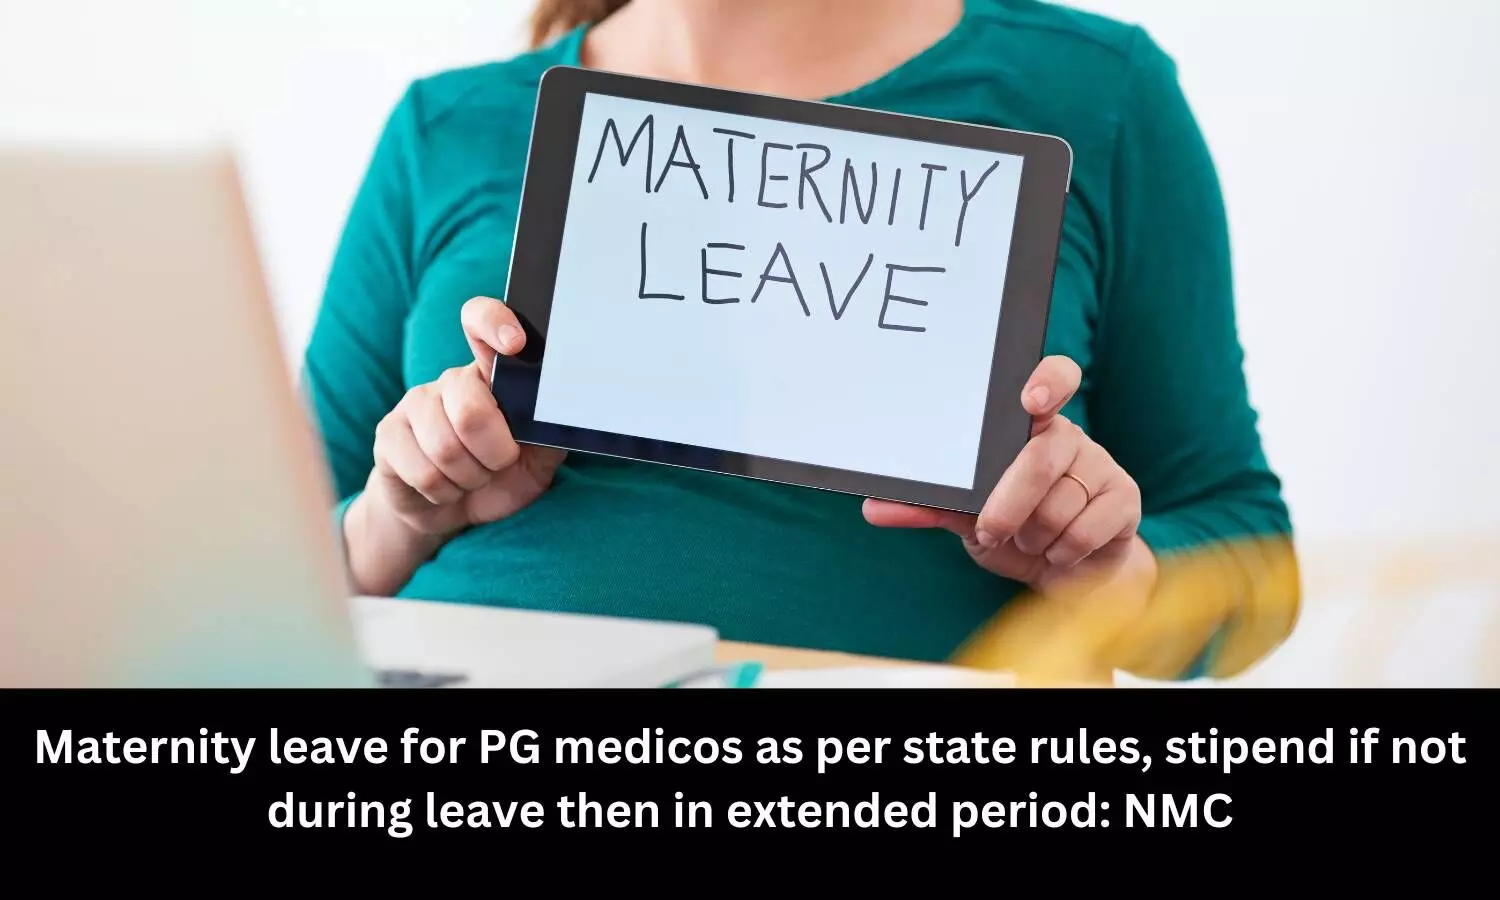 Maternity leave for PG medical students as per state rules, stipend if not during leave then in extended period: NMC